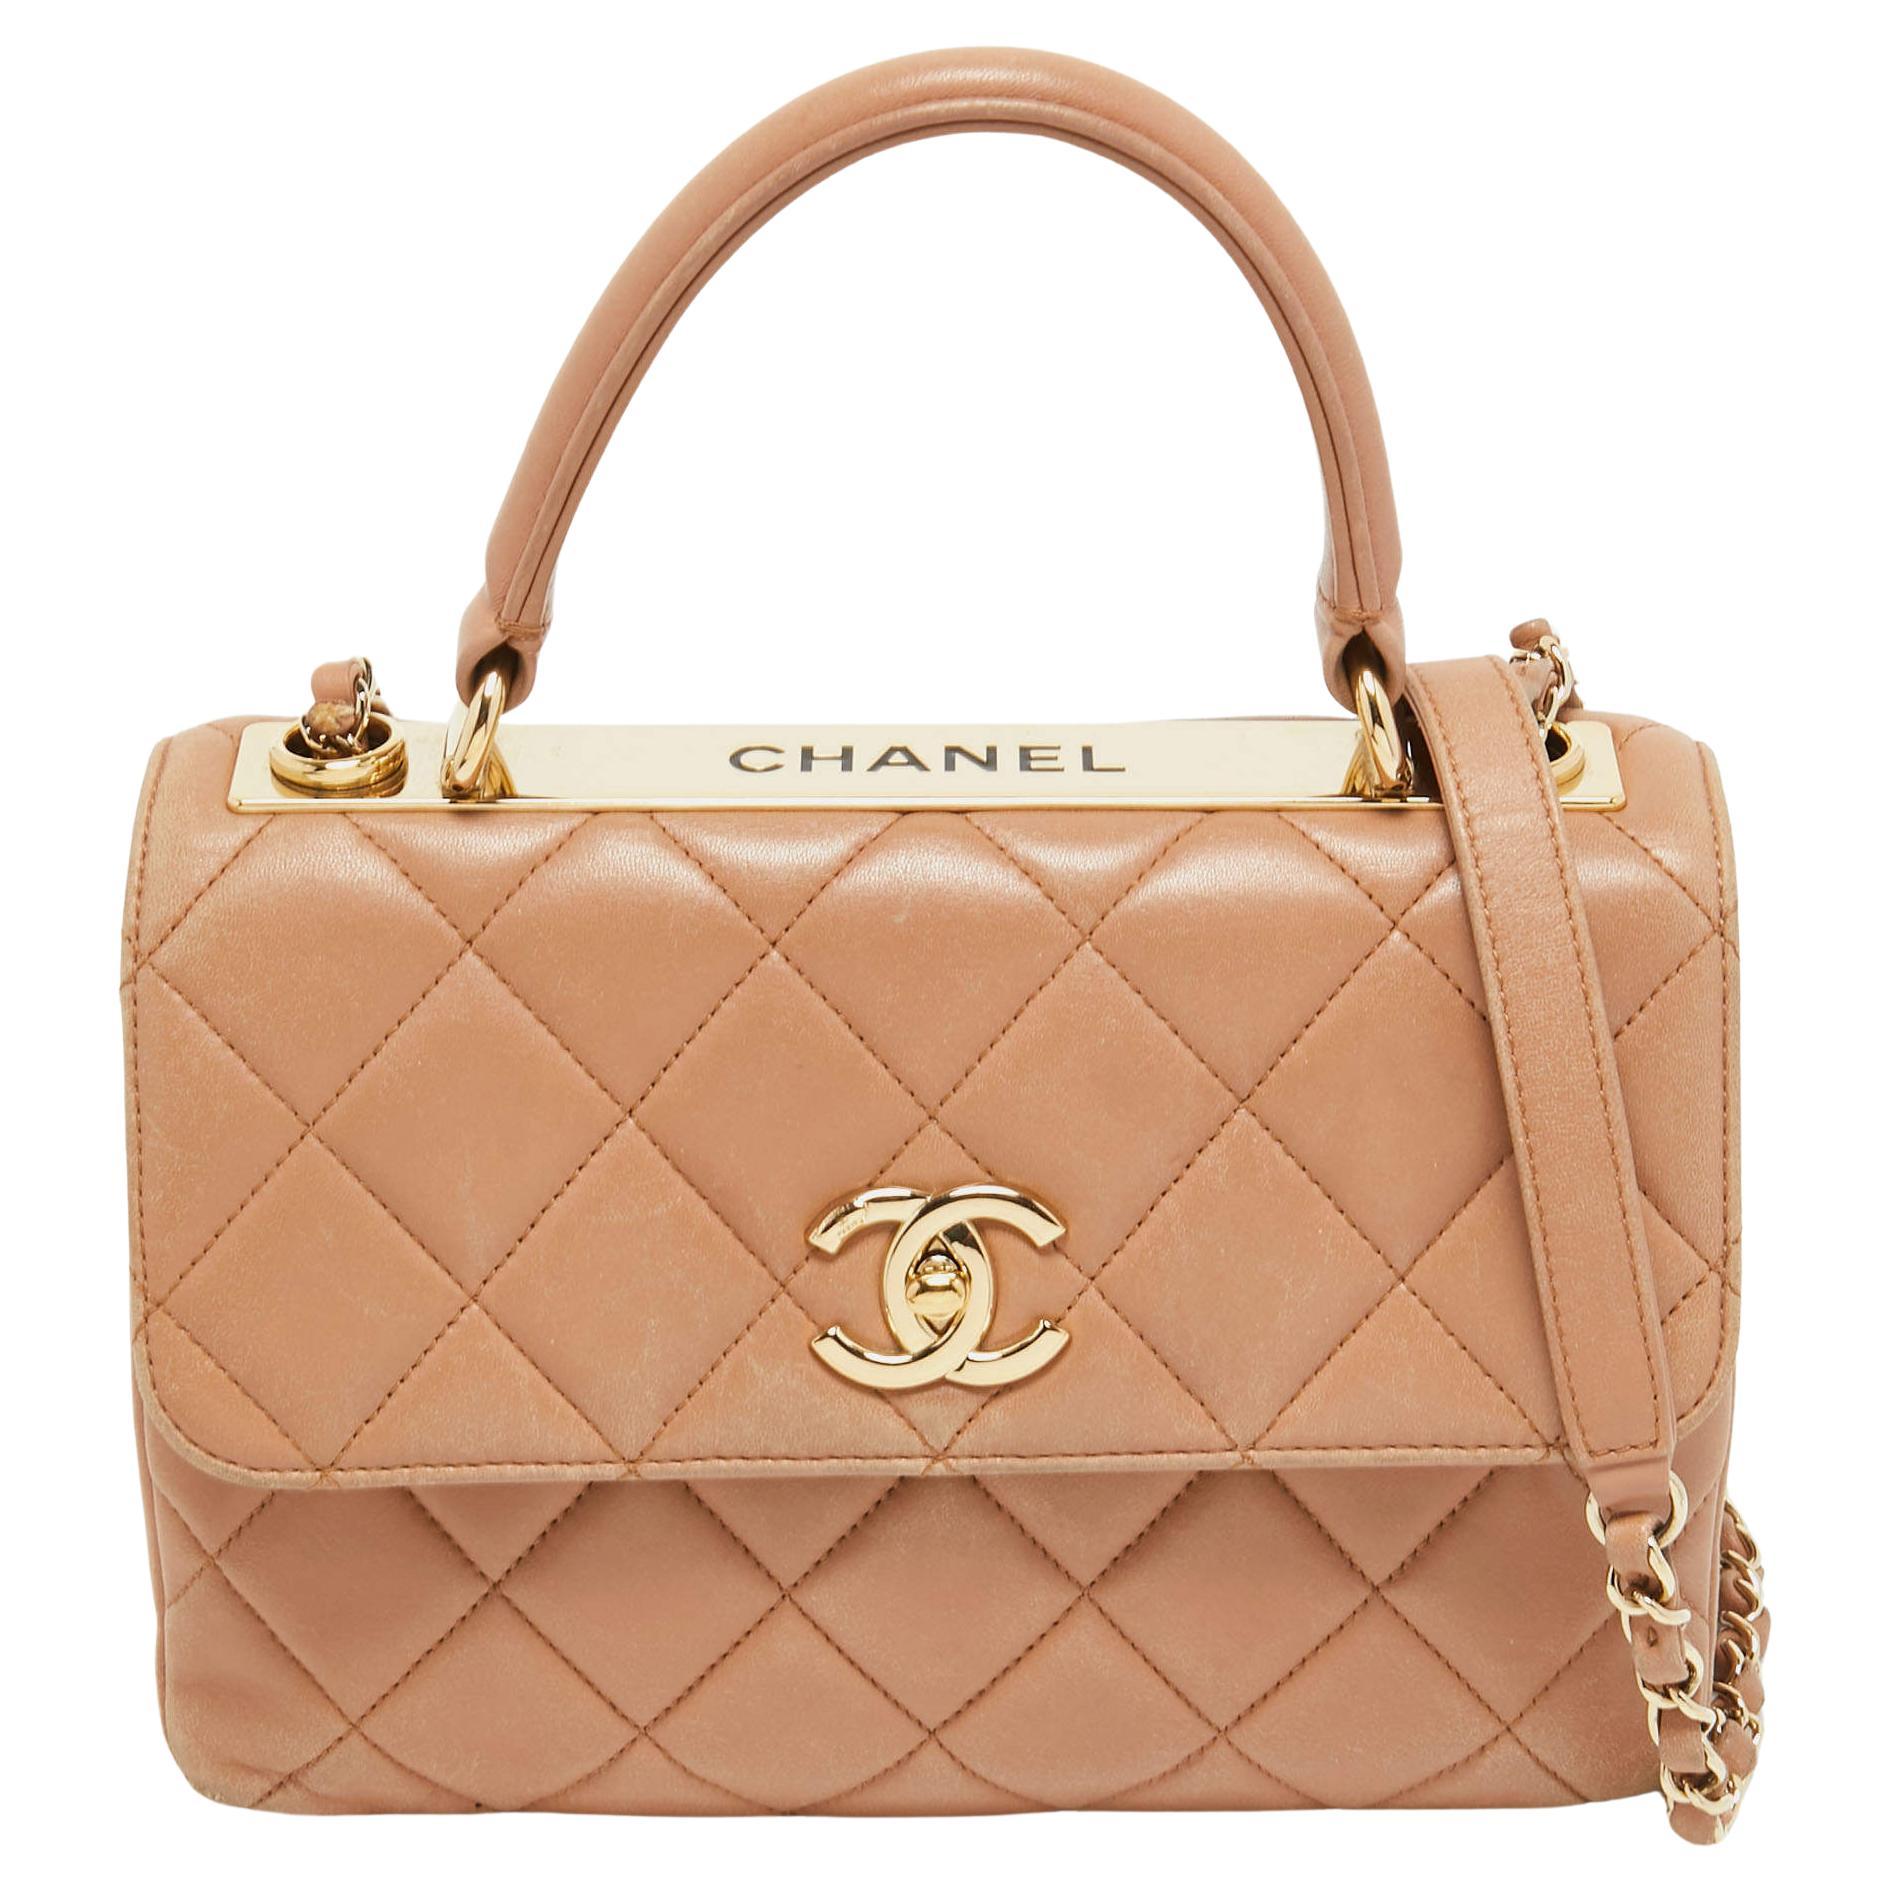 Chanel Beige Quilted Leather Small Trendy CC Flap Top Handle Bag